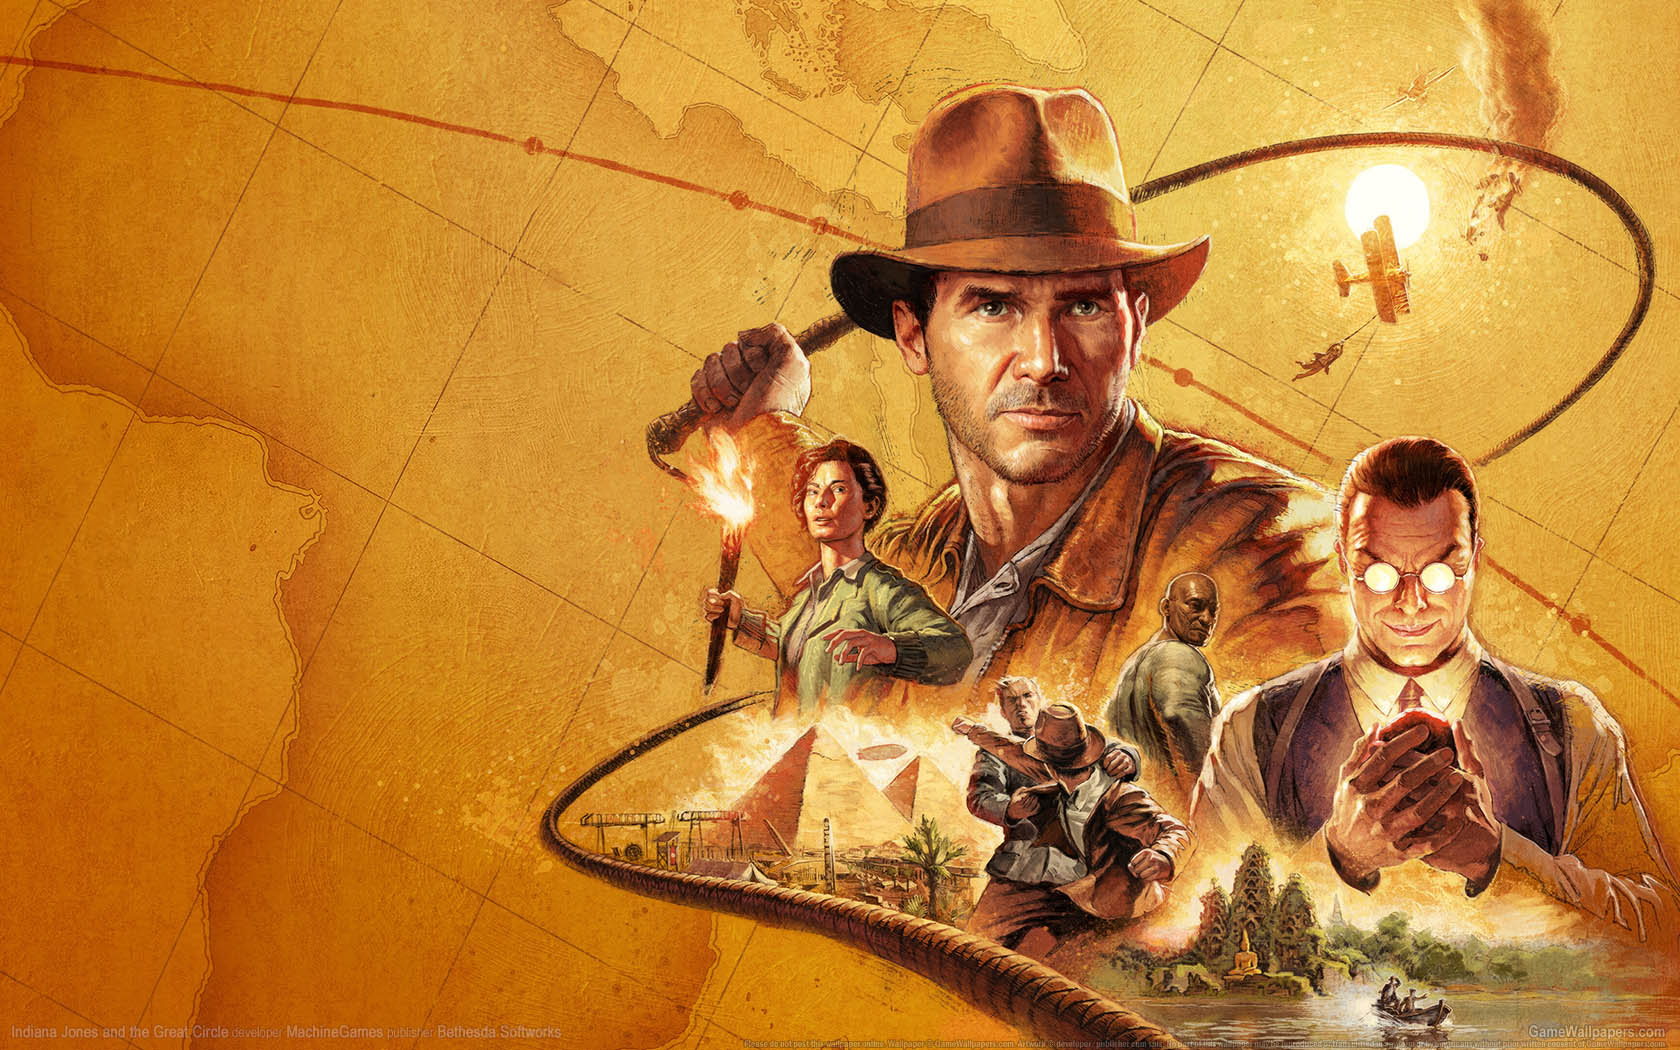 Indiana Jones and the Great Circle wallpaper 01 1680x1050